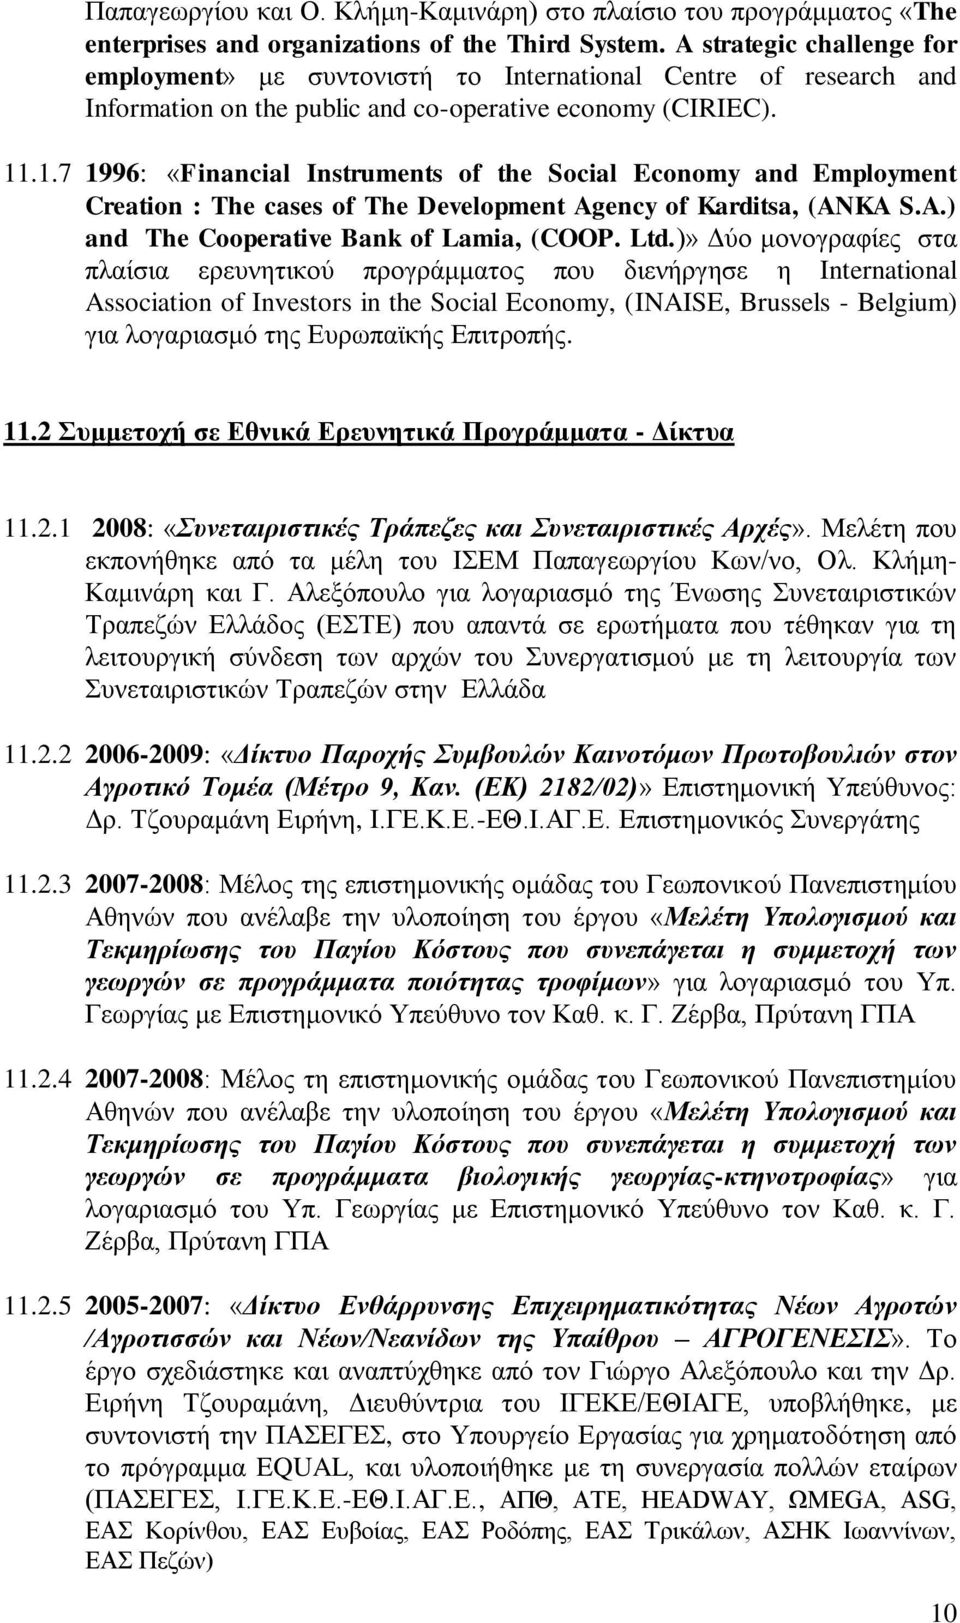 .1.7 1996: «Financial Instruments of the Social Economy and Employment Creation : The cases of The Development Agency of Karditsa, (ANKA S.A.) and The Cooperative Bank of Lamia, (COOP. Ltd.